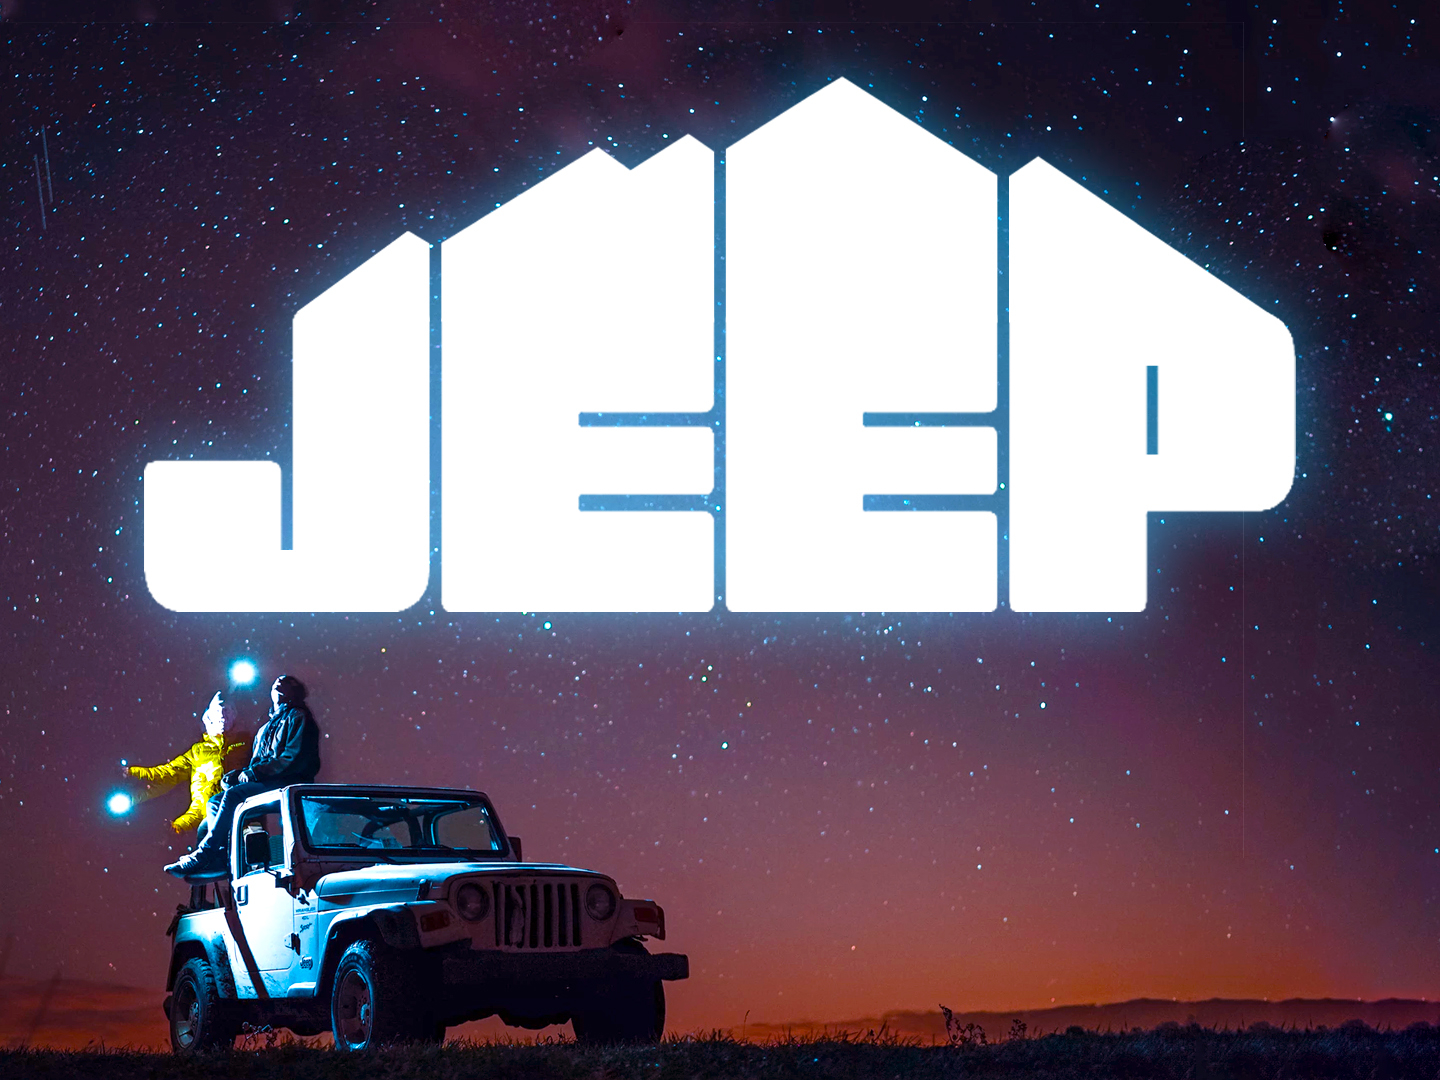 Download Jeep logo wallpaper APK Free for Android - Jeep logo wallpaper APK  Download